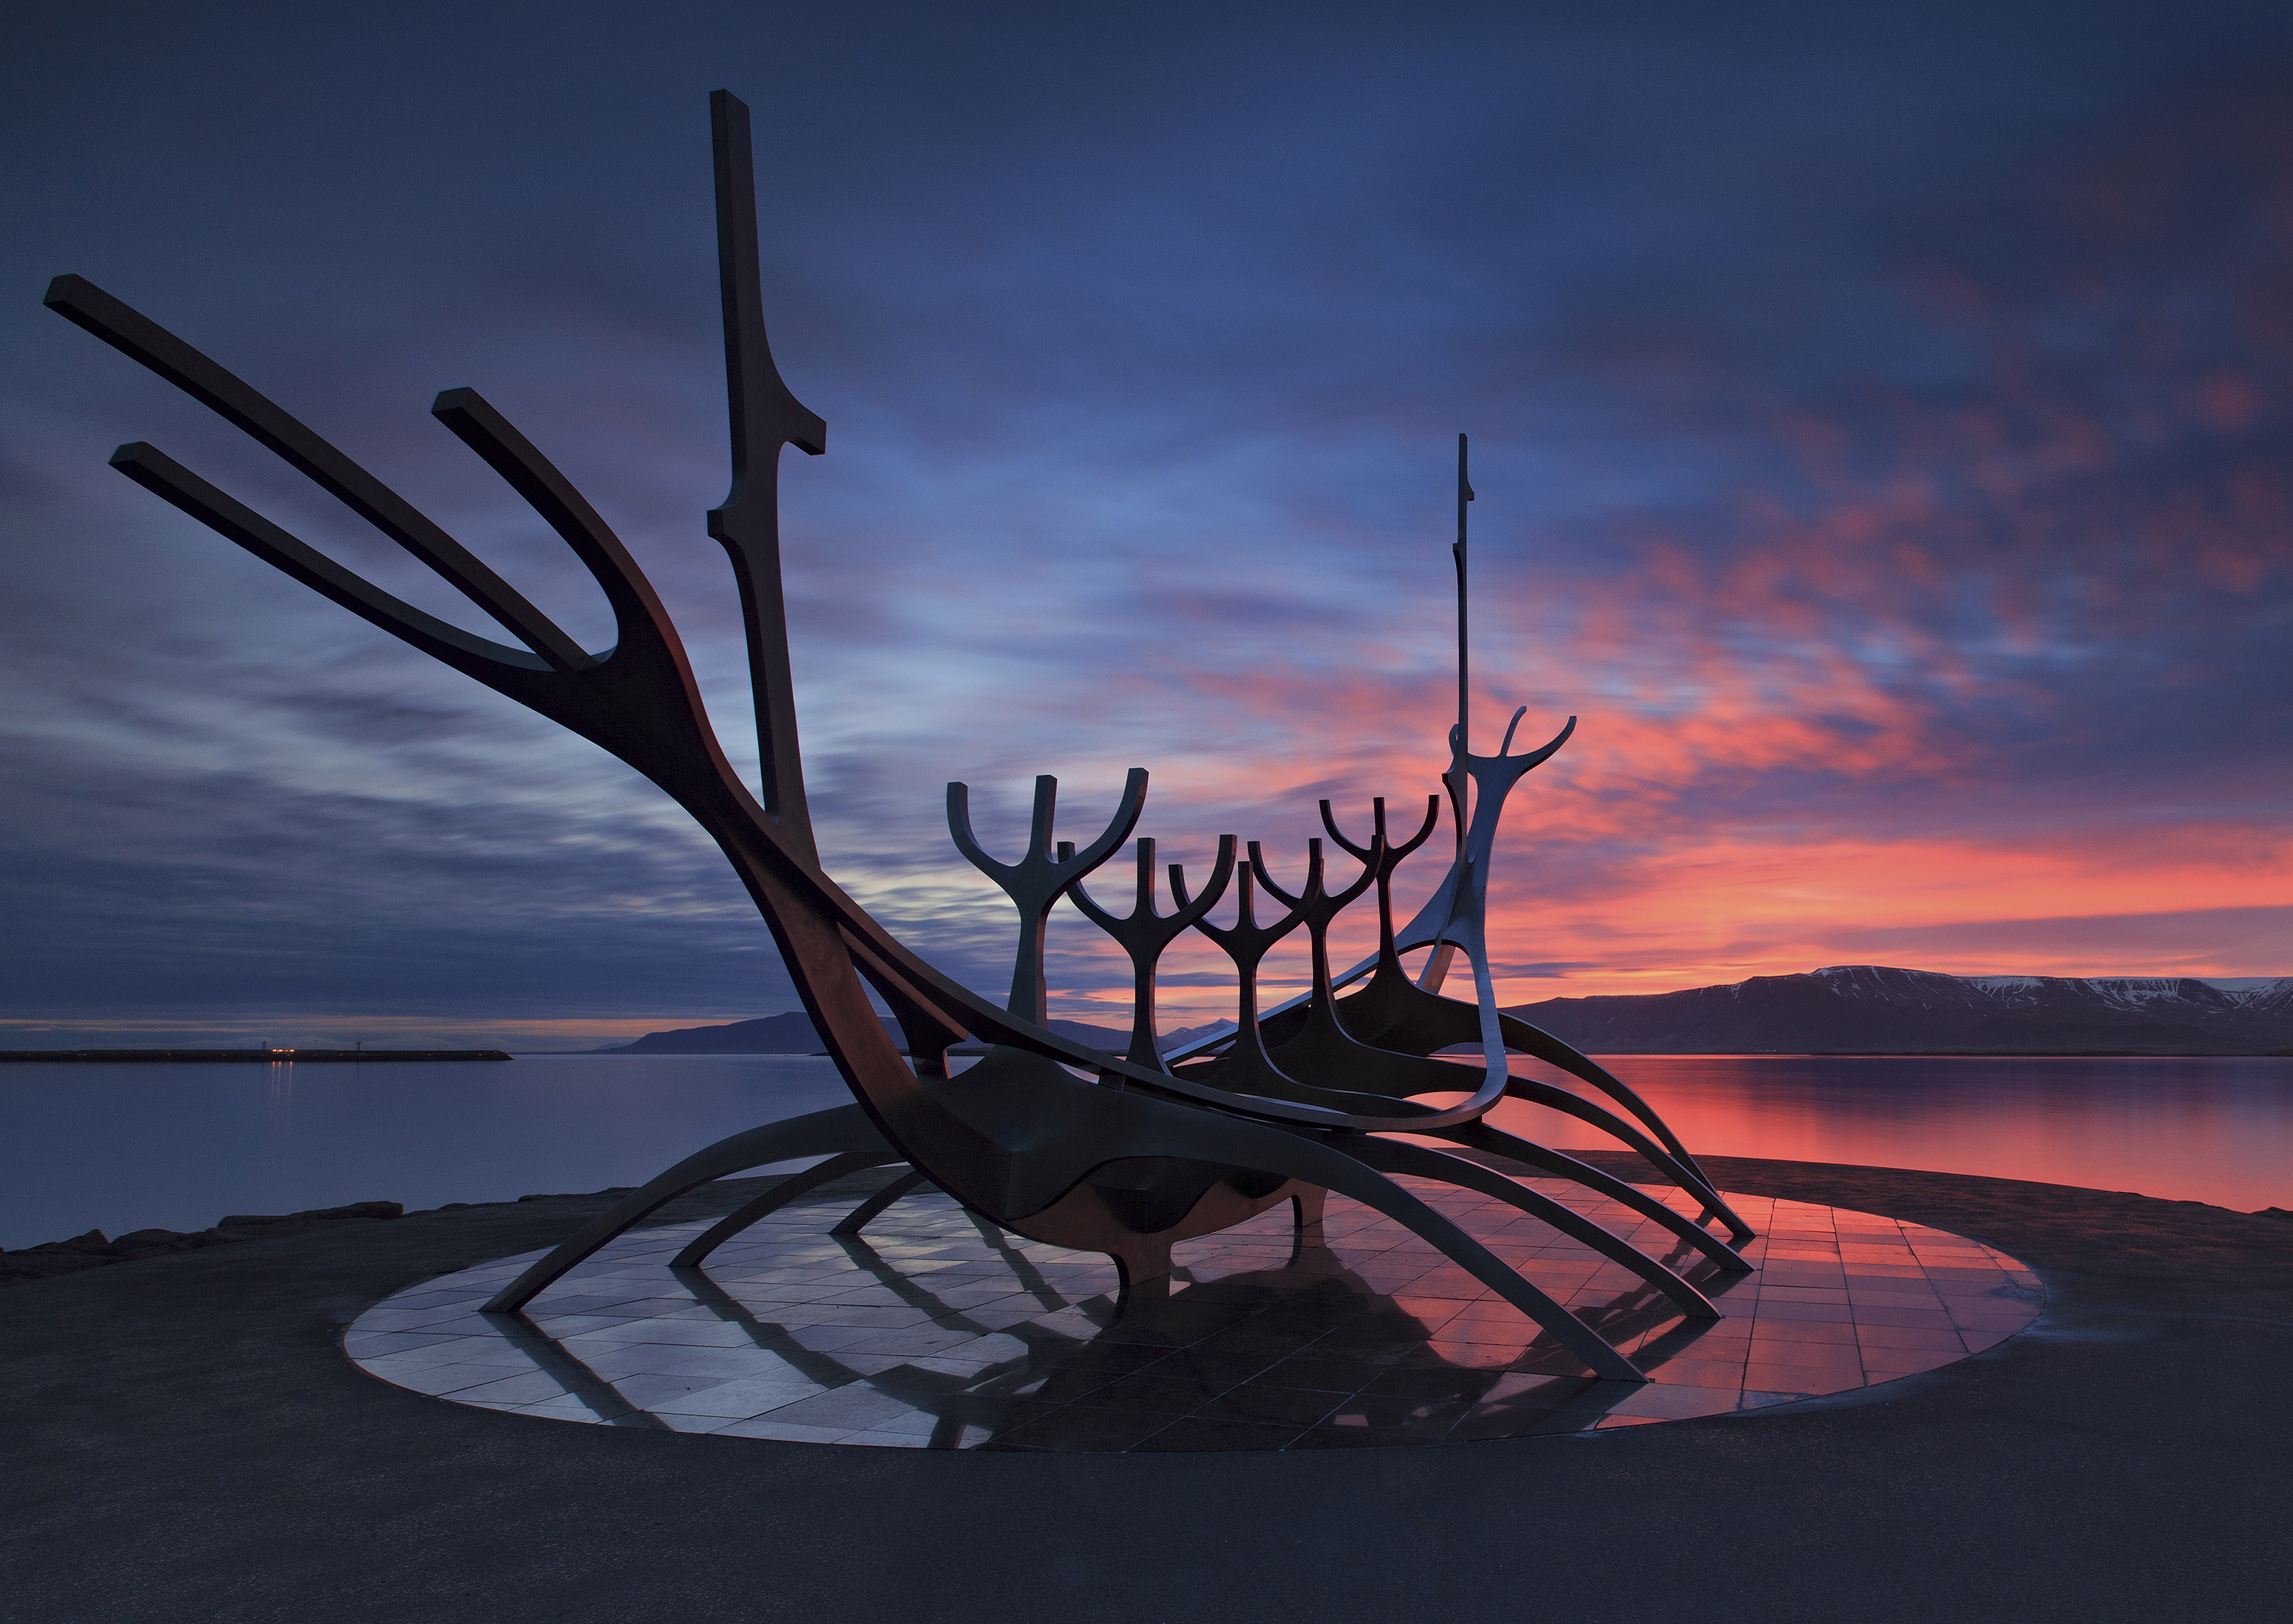 The Sun Voyager is a sculpture of stunning beauty by central Reykjavík's shore line.